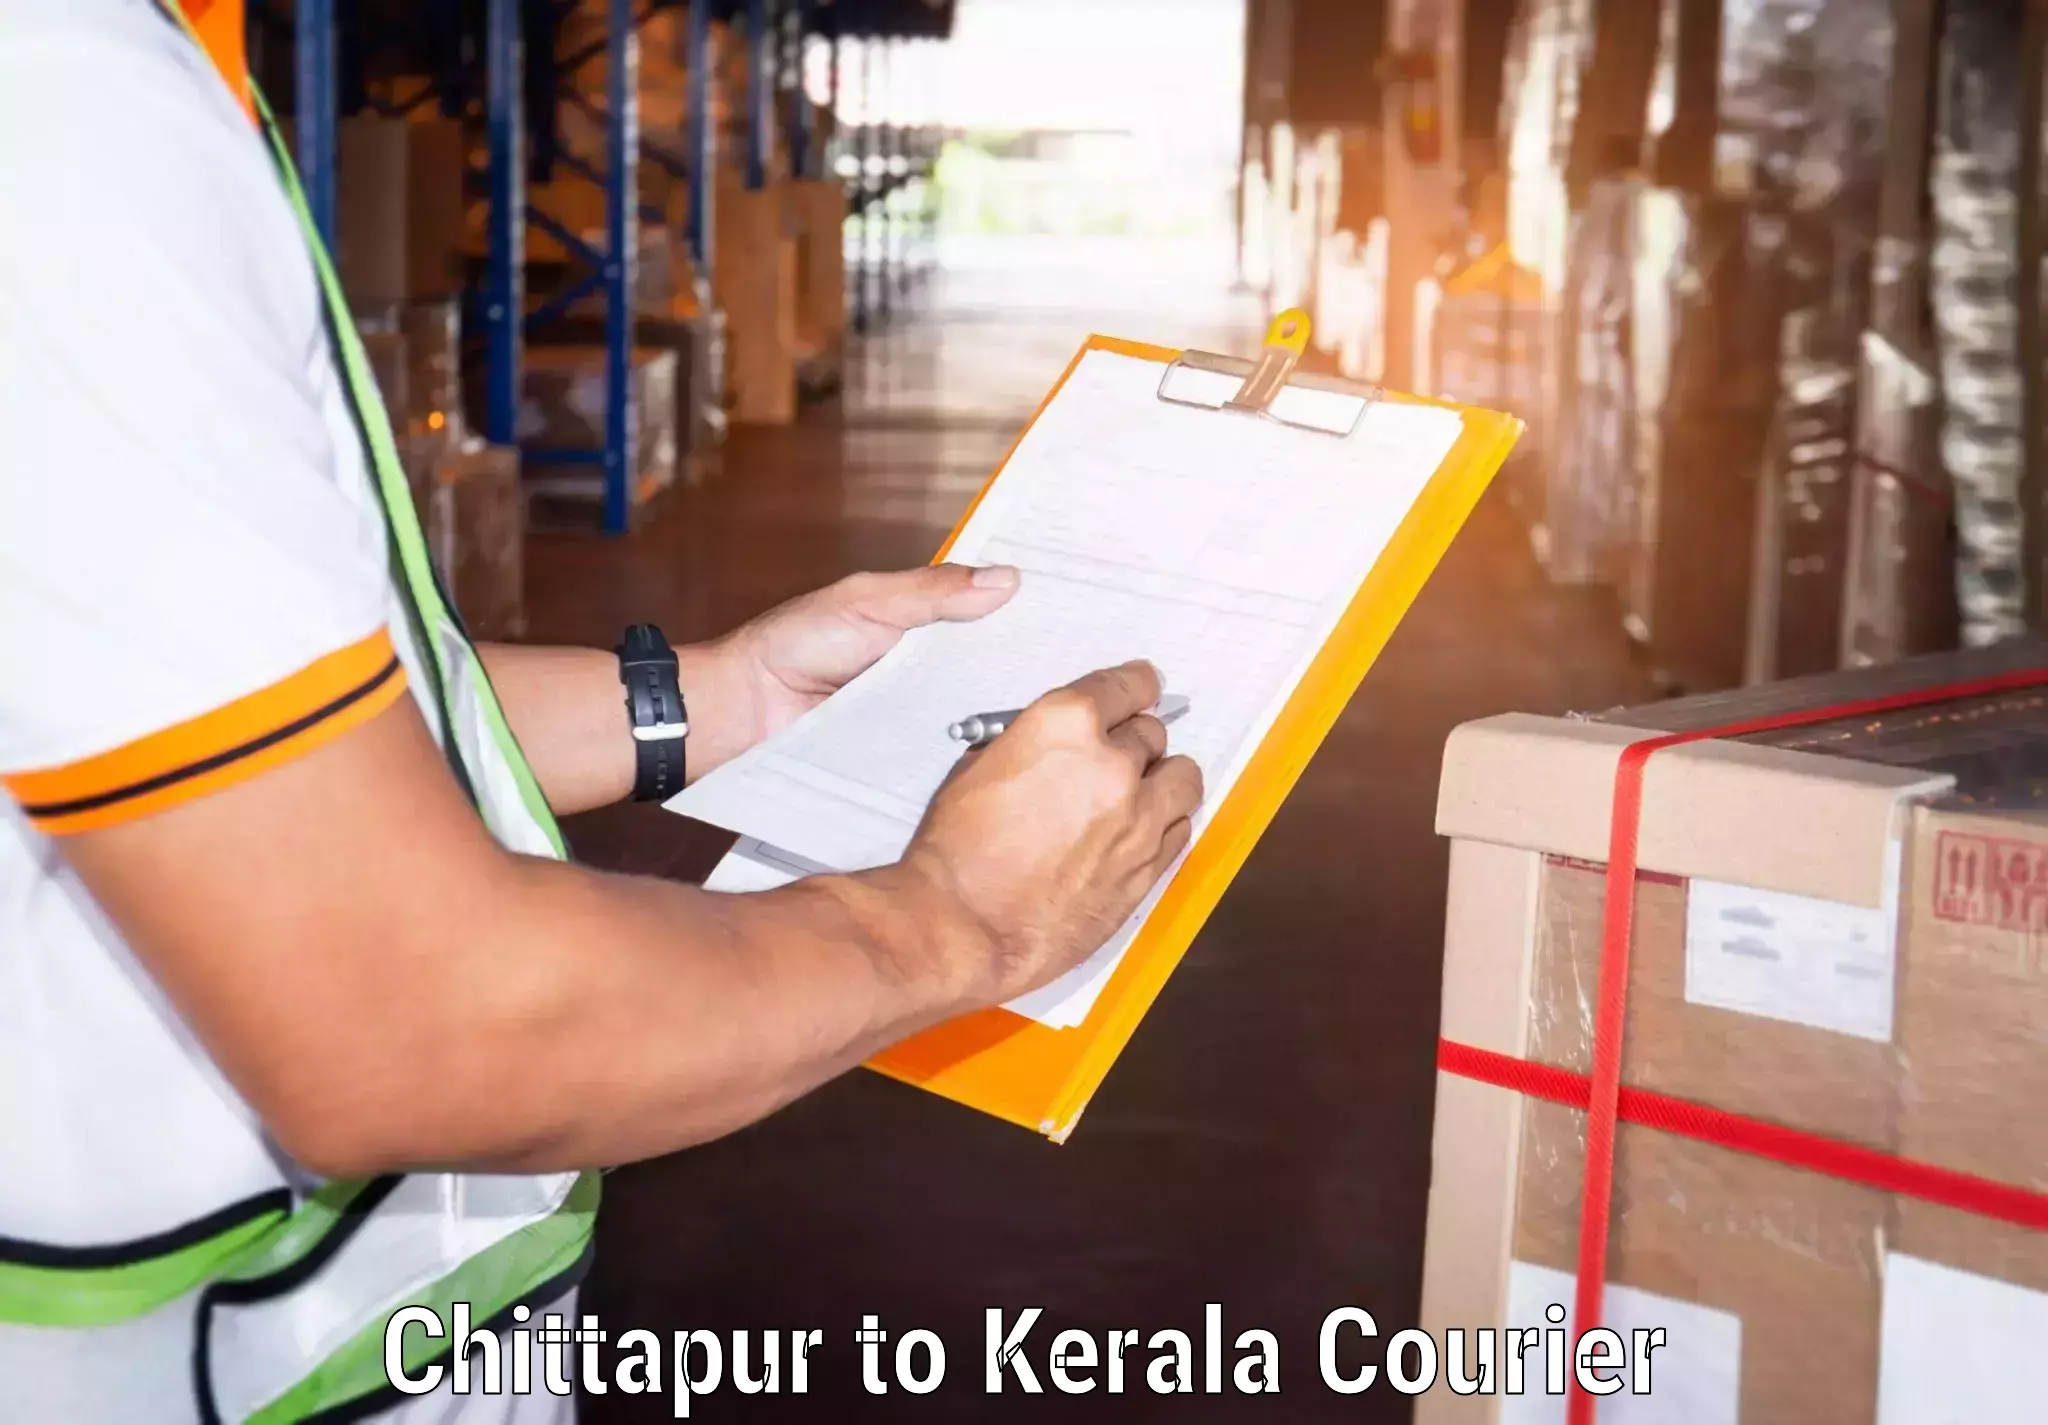 Digital courier platforms Chittapur to Cochin University of Science and Technology